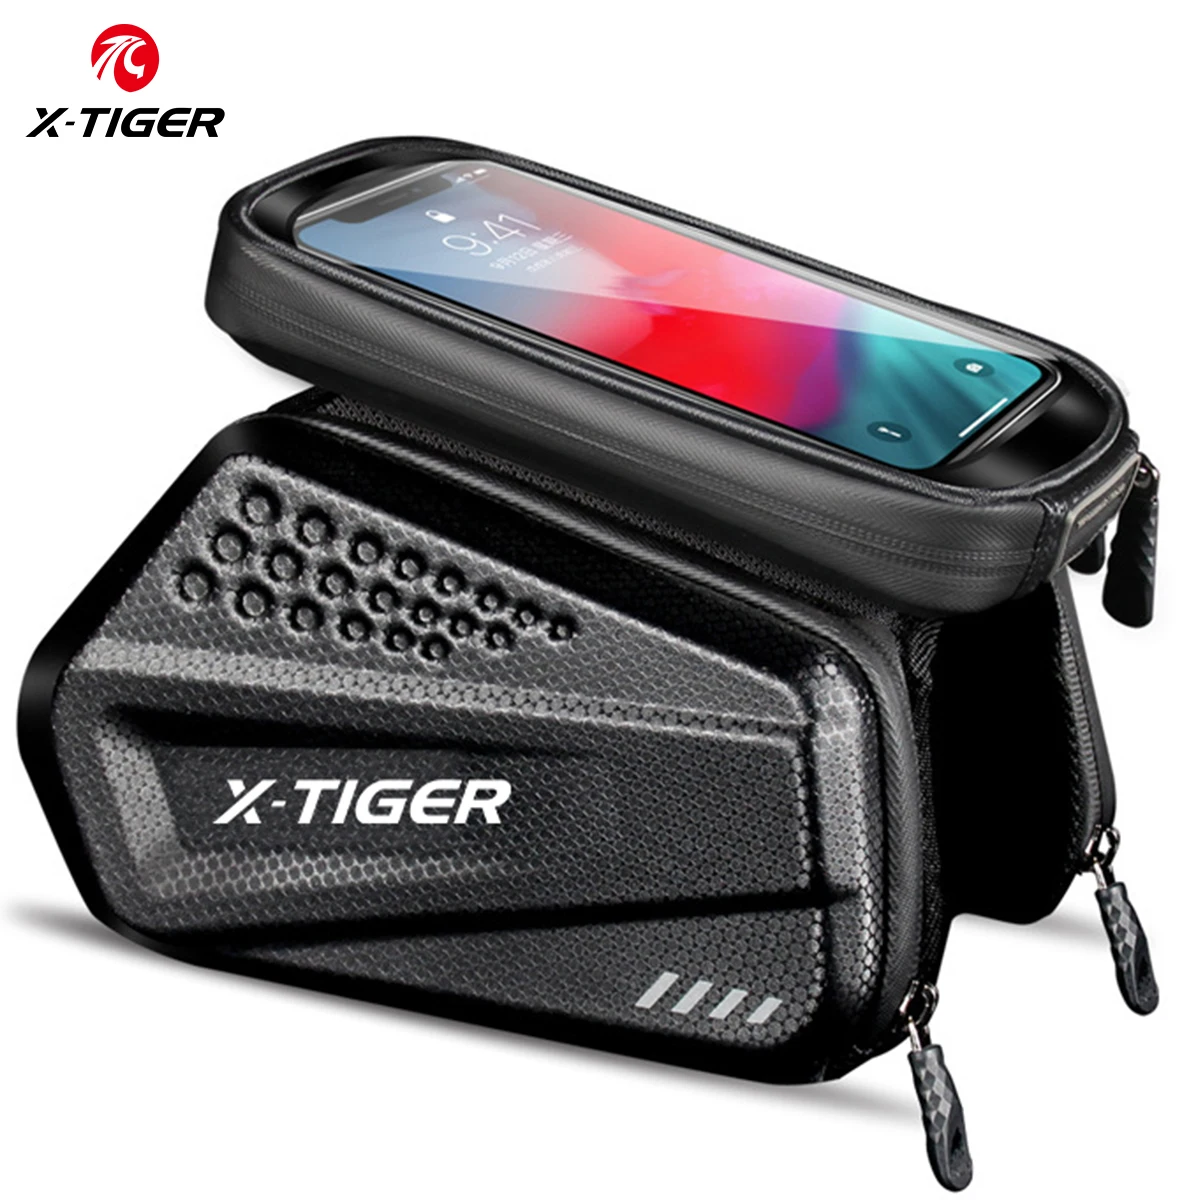 Permalink to X-TIGER Rainproof Cycling Bag Shockproof Reflective Bike Bag Frame Front Phone Case Touchscreen MTB Bicycle Bag Accessories